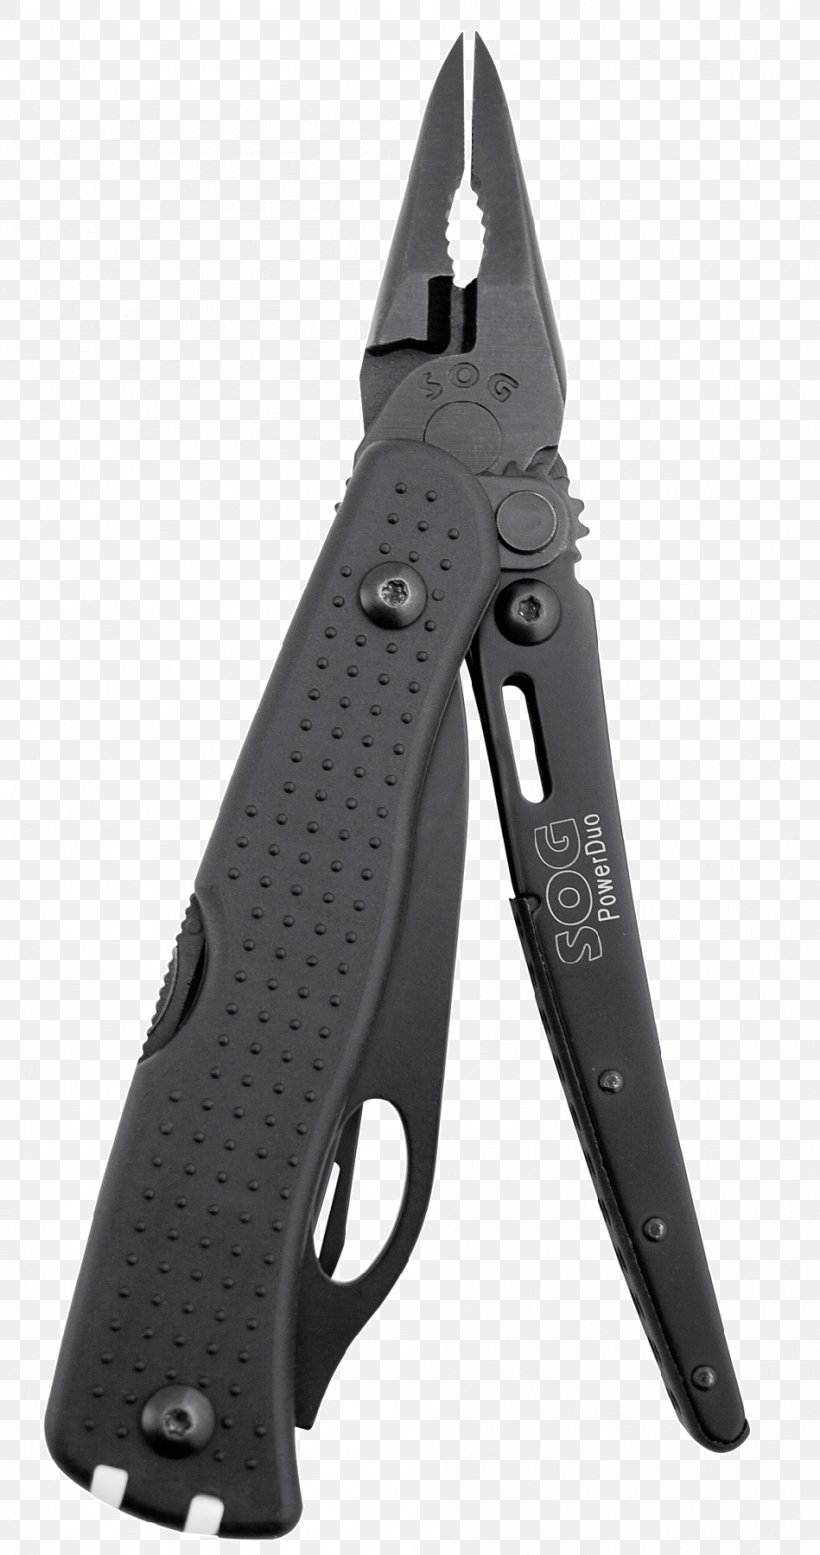 Multi-function Tools & Knives Knife SOG Specialty Knives & Tools, LLC Black Oxide, PNG, 949x1800px, Multifunction Tools Knives, Black Oxide, Blade, Coating, Cold Weapon Download Free